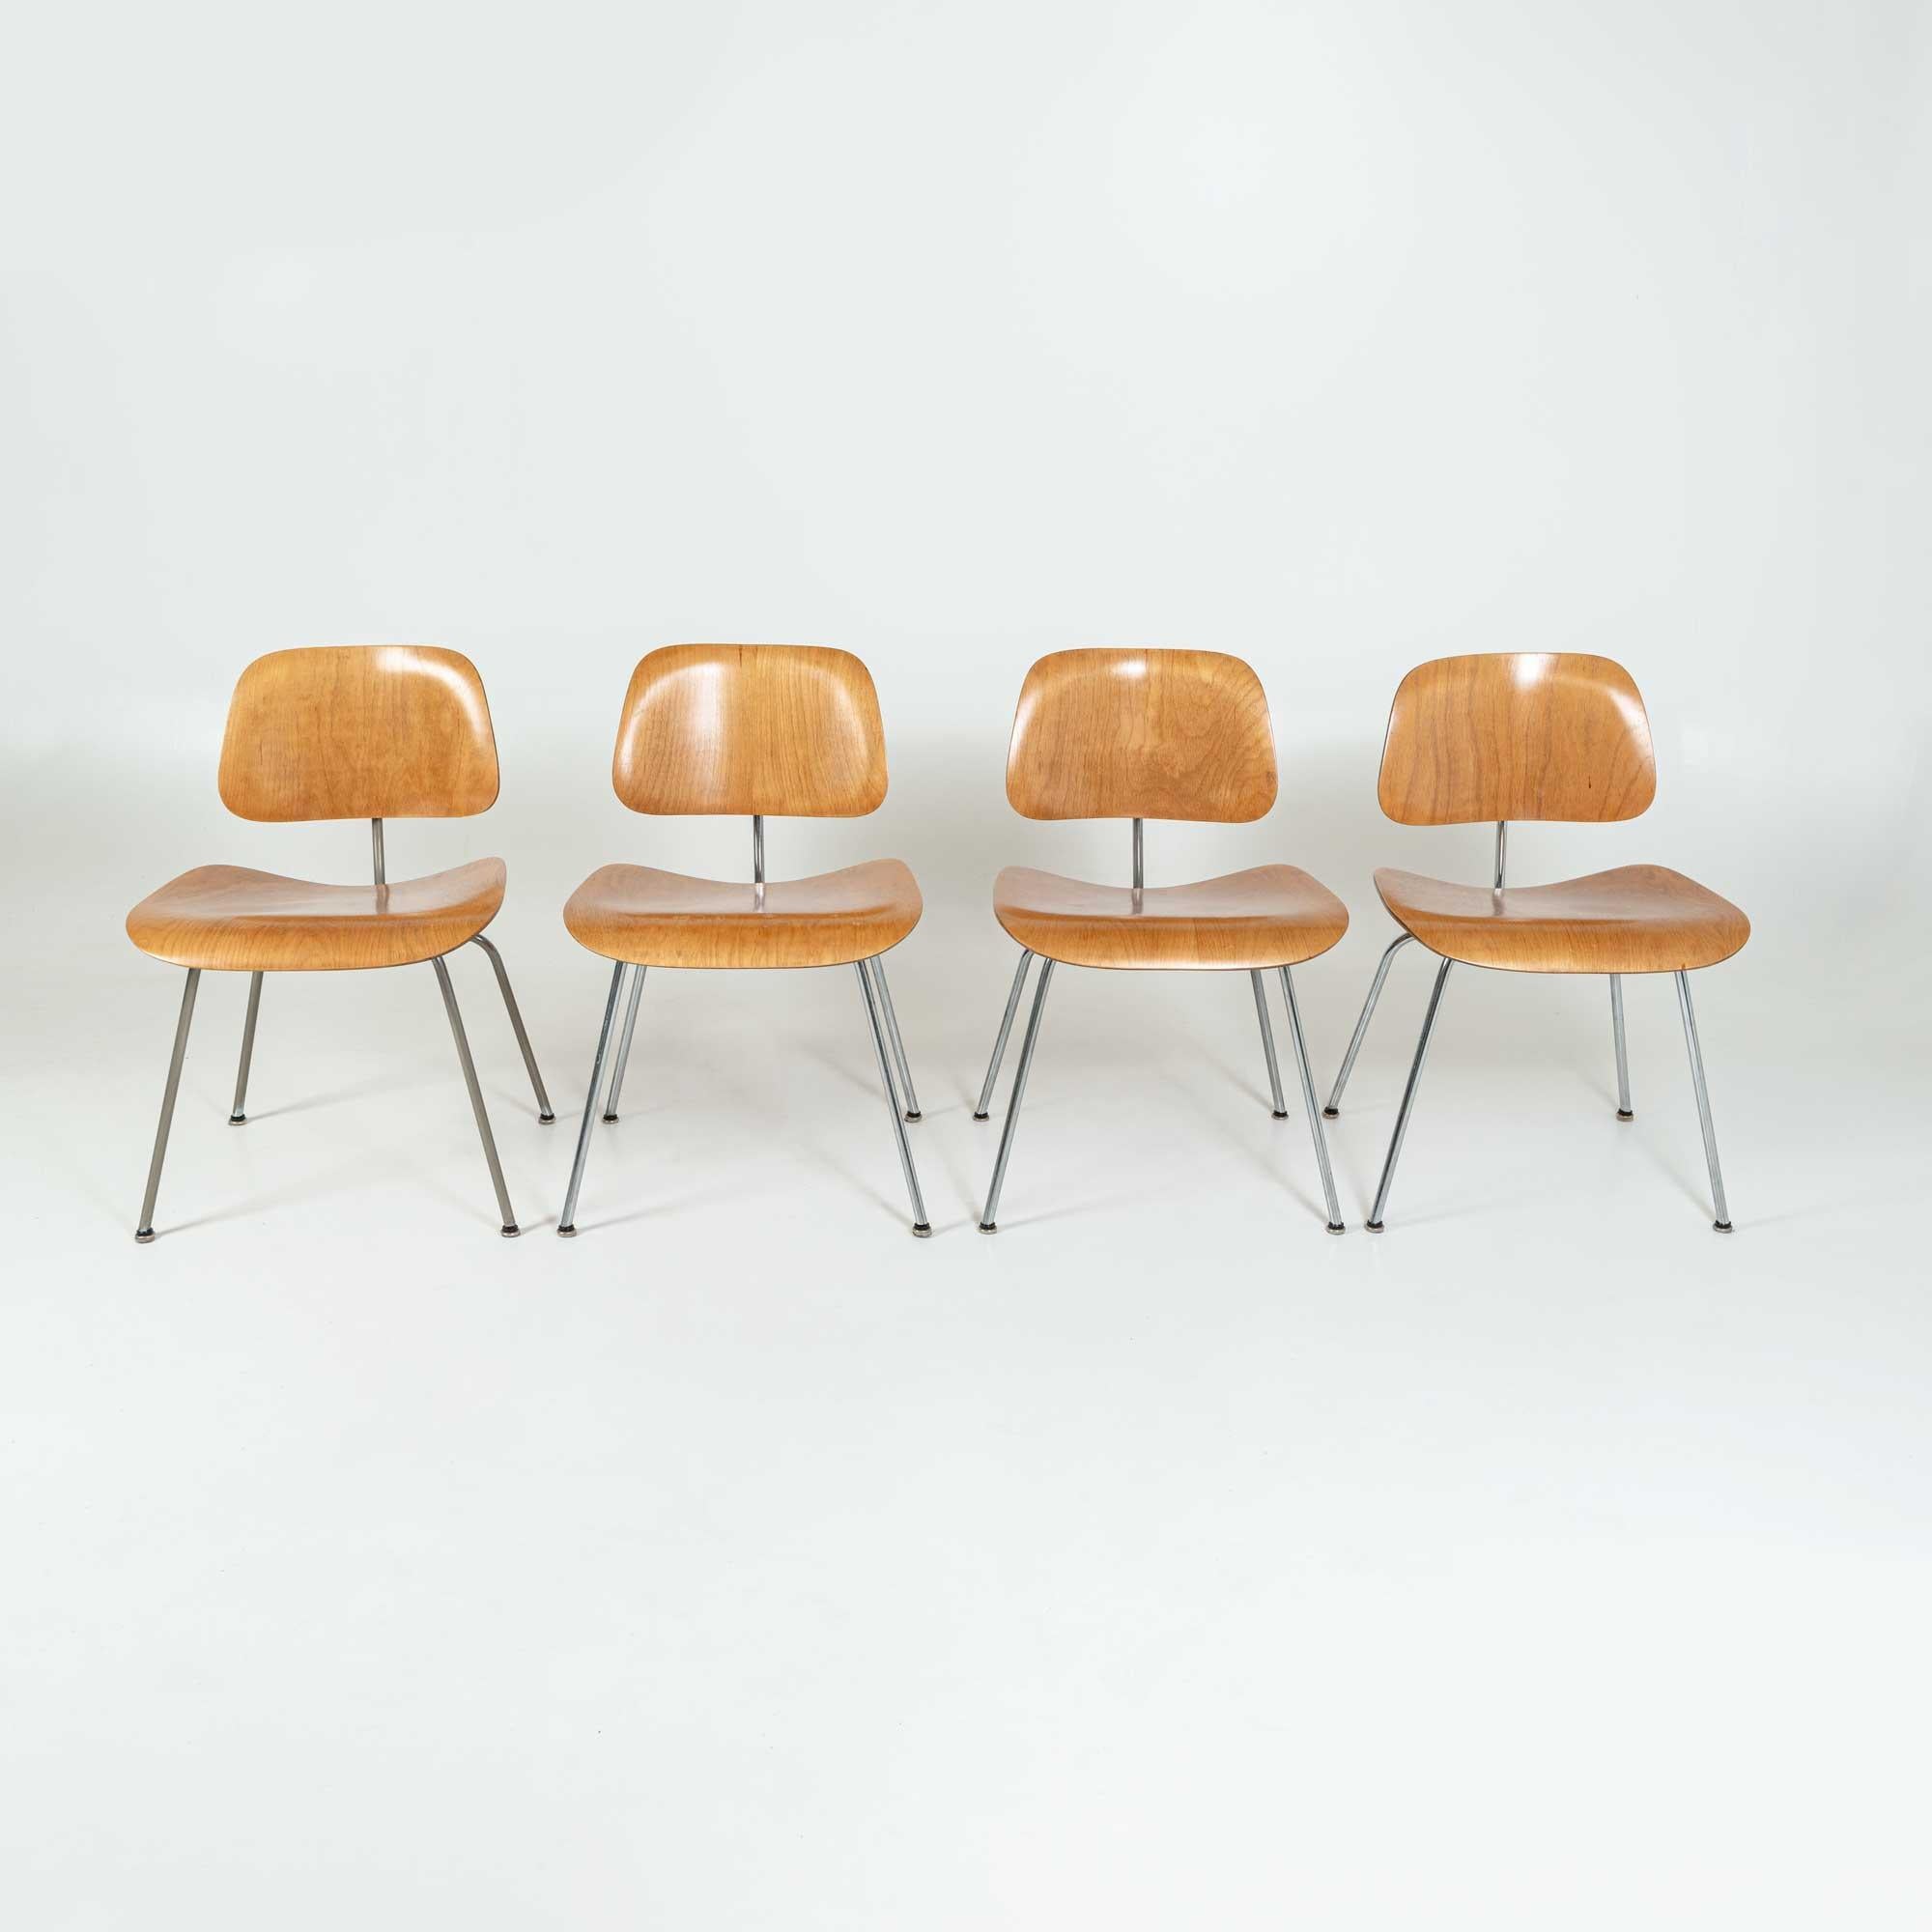 Four Early DCM chairs designed by Charles & Ray Eames for Evans, distributed by Herman Miller. Labels remain intact on all four chairs. Shock mounts has been replaced and the chairs have been previously refinished.
Overall they are all in great